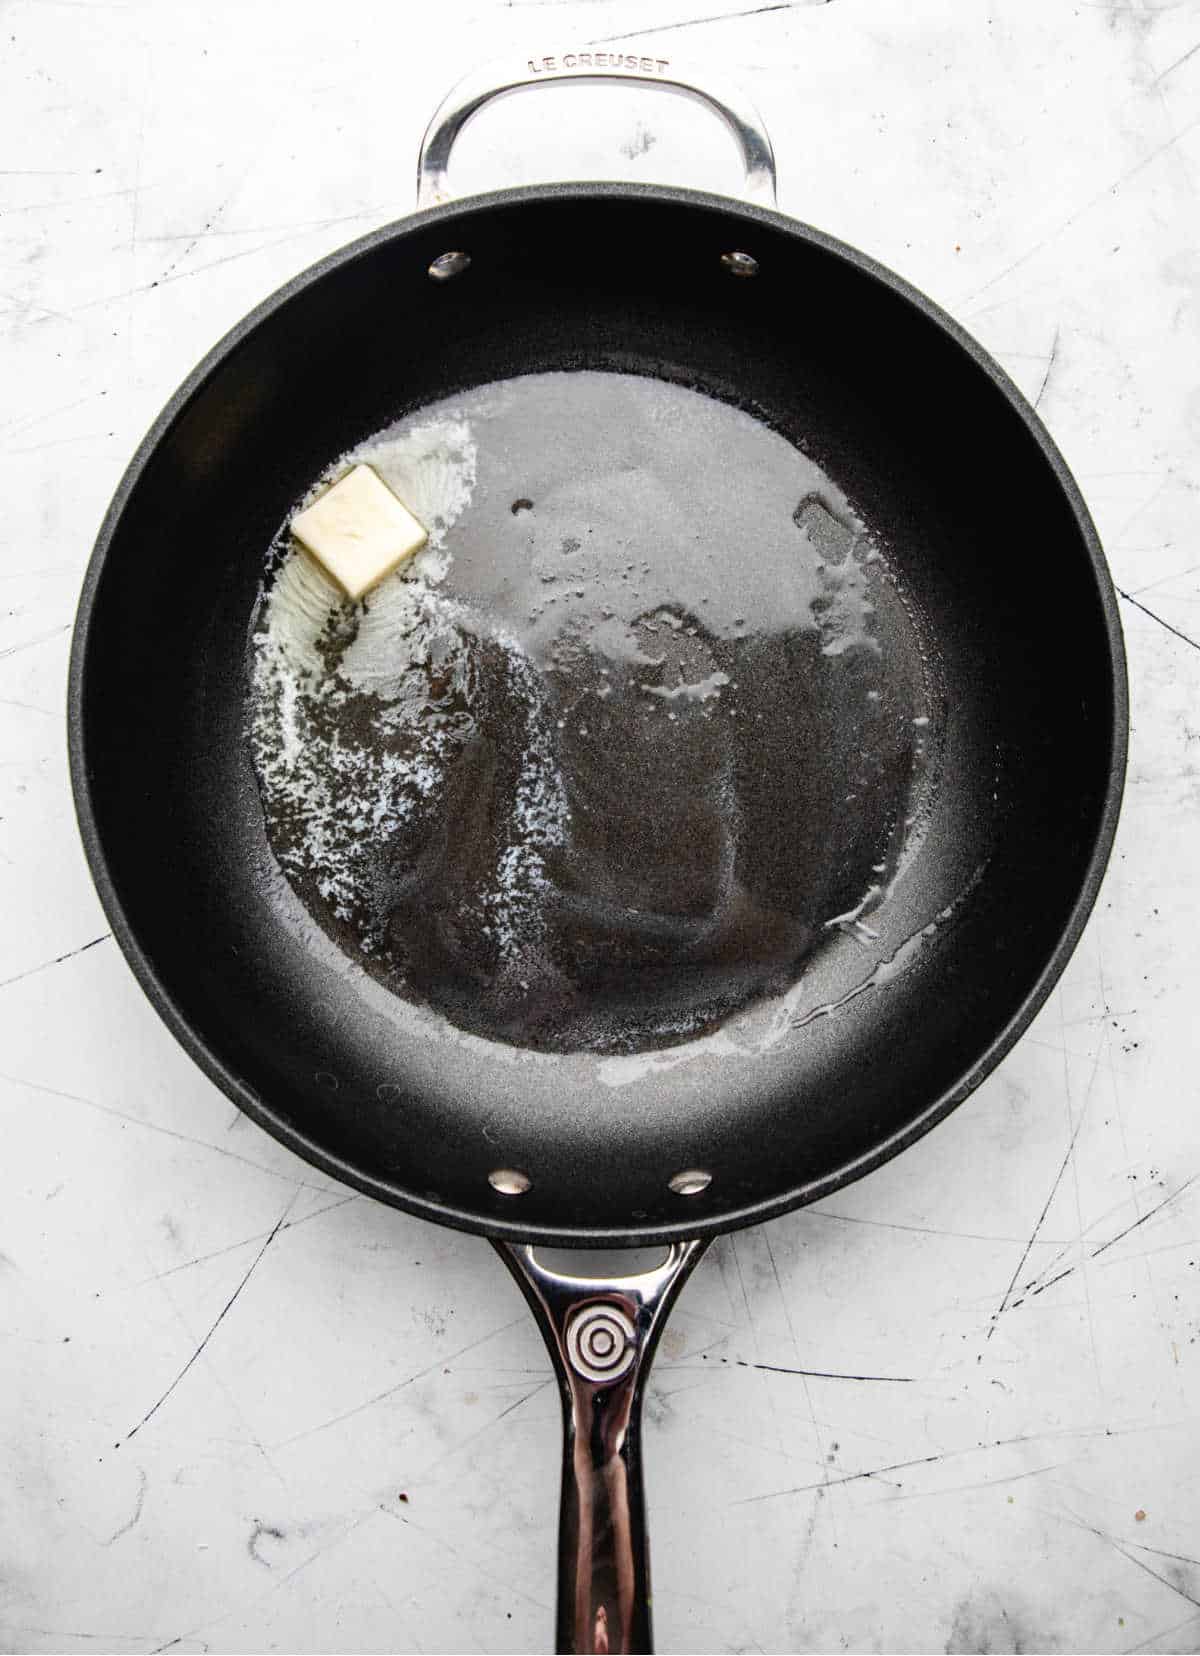 Butter melting in a cast iron skillet. 